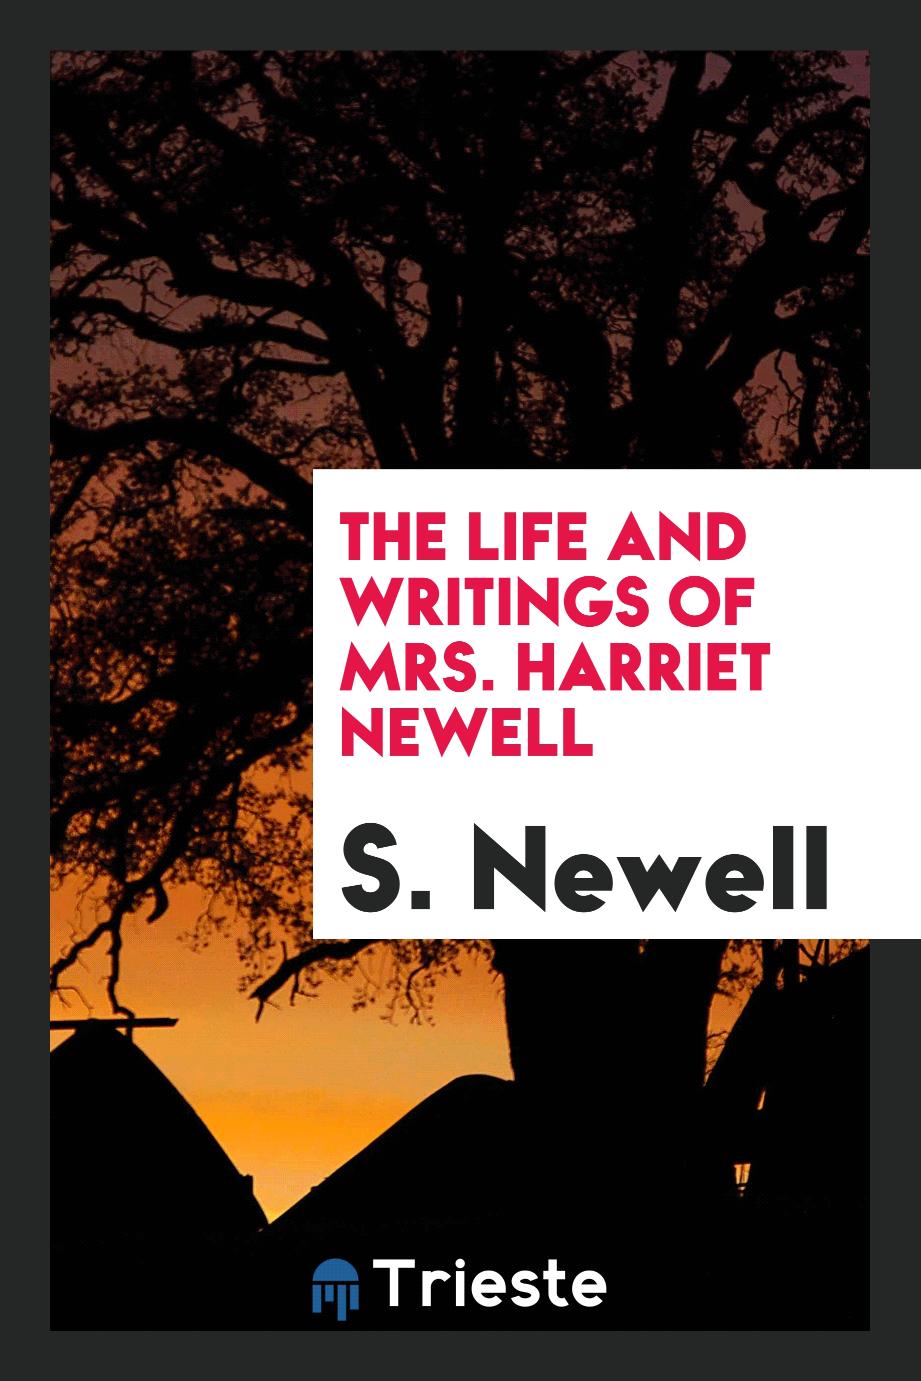 The Life and Writings of Mrs. Harriet Newell